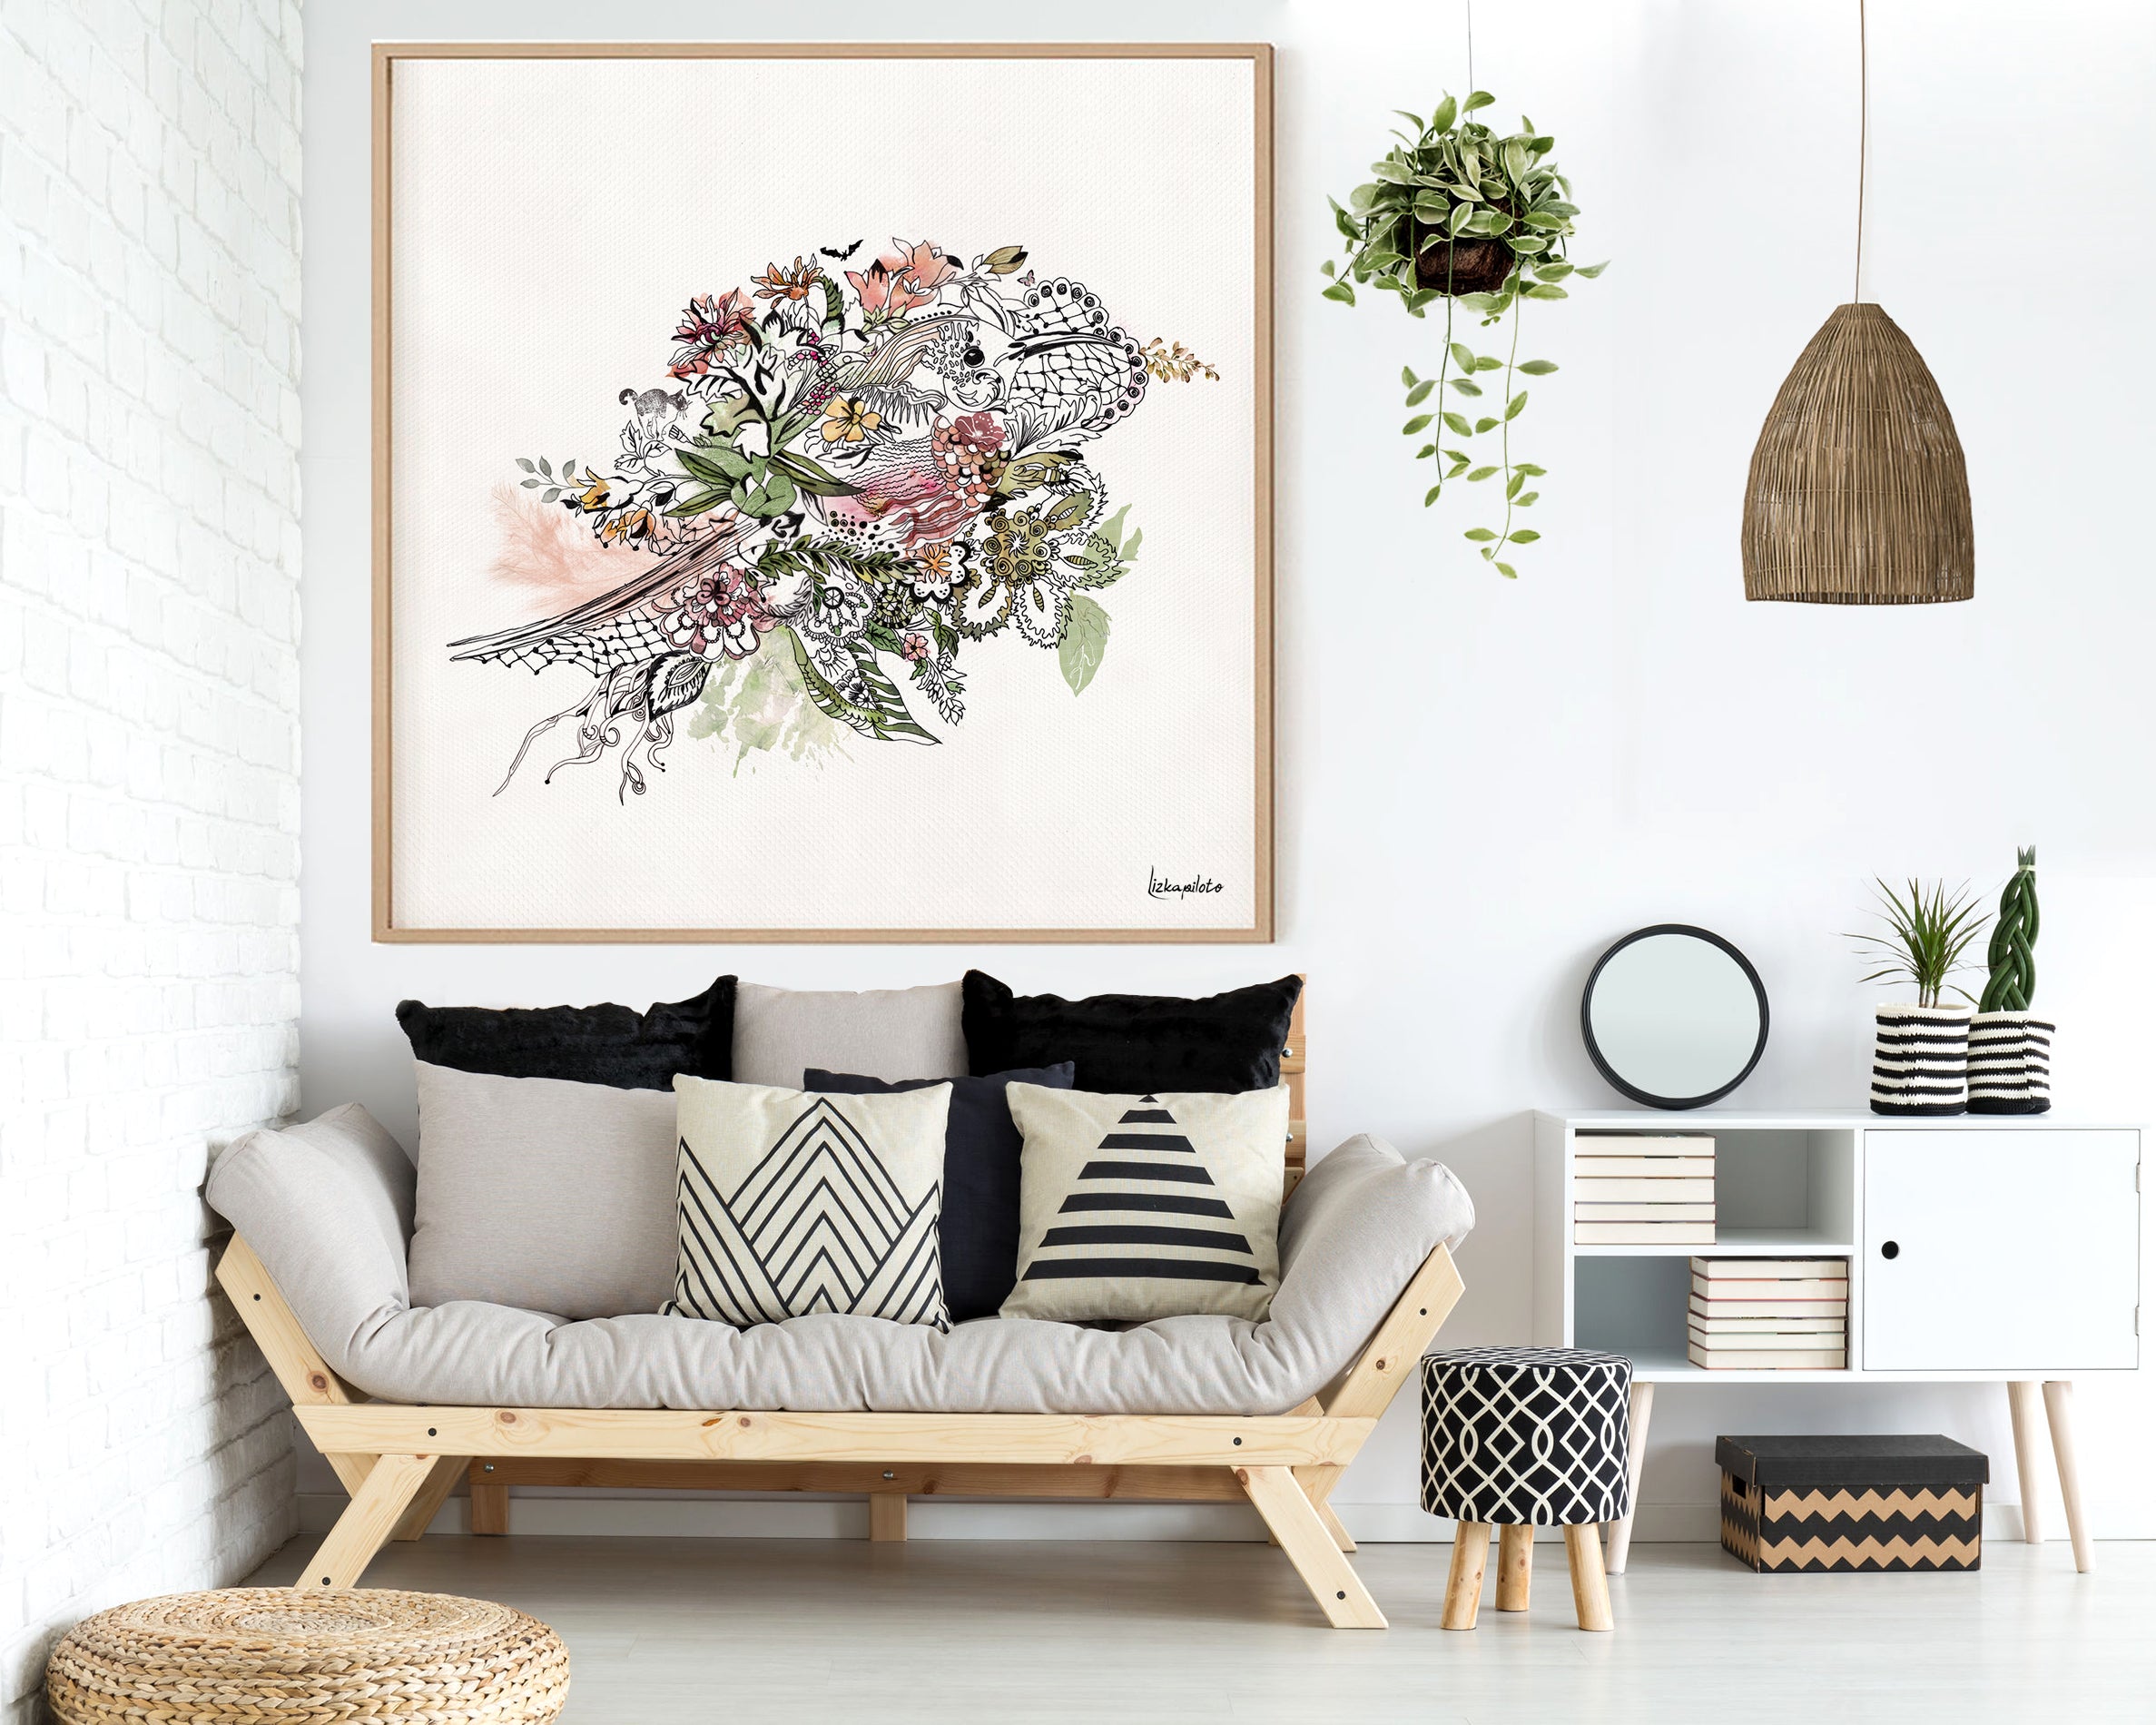  A large painting of floral bird hanged on the modern living room